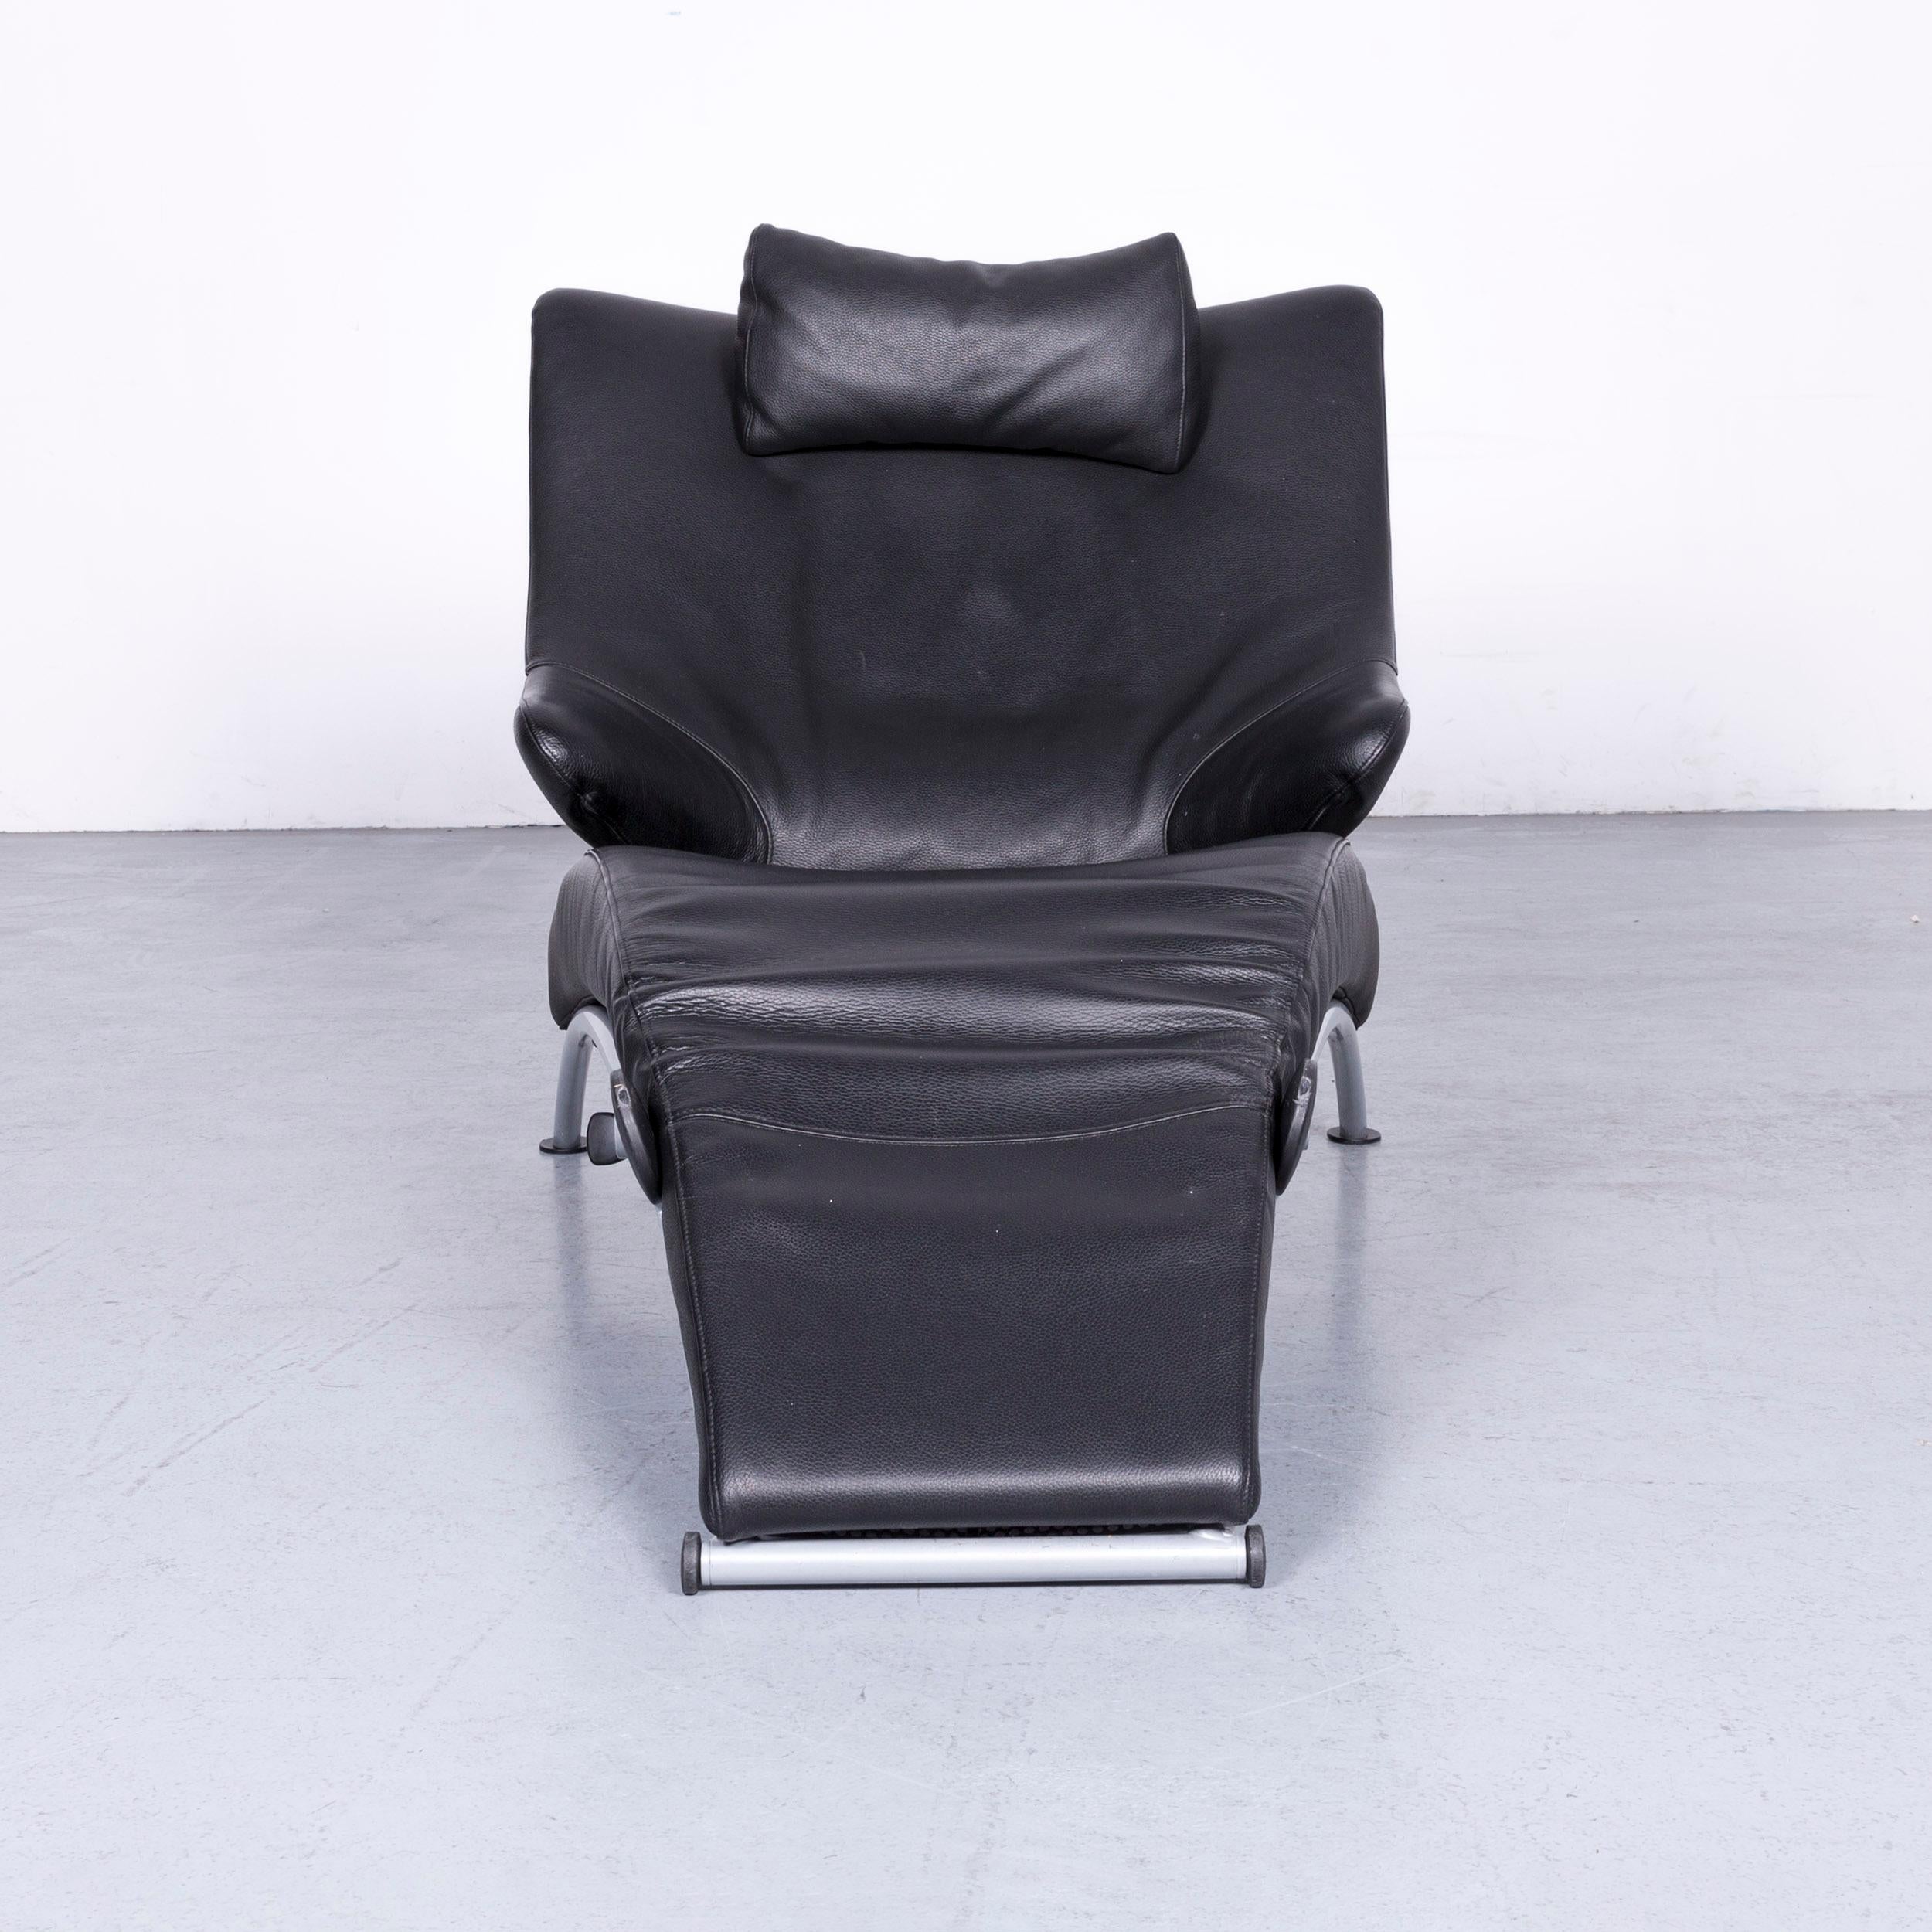 WK Wohnen Solo 699 Designer Leather Chair Black One-Seat In Good Condition For Sale In Cologne, DE